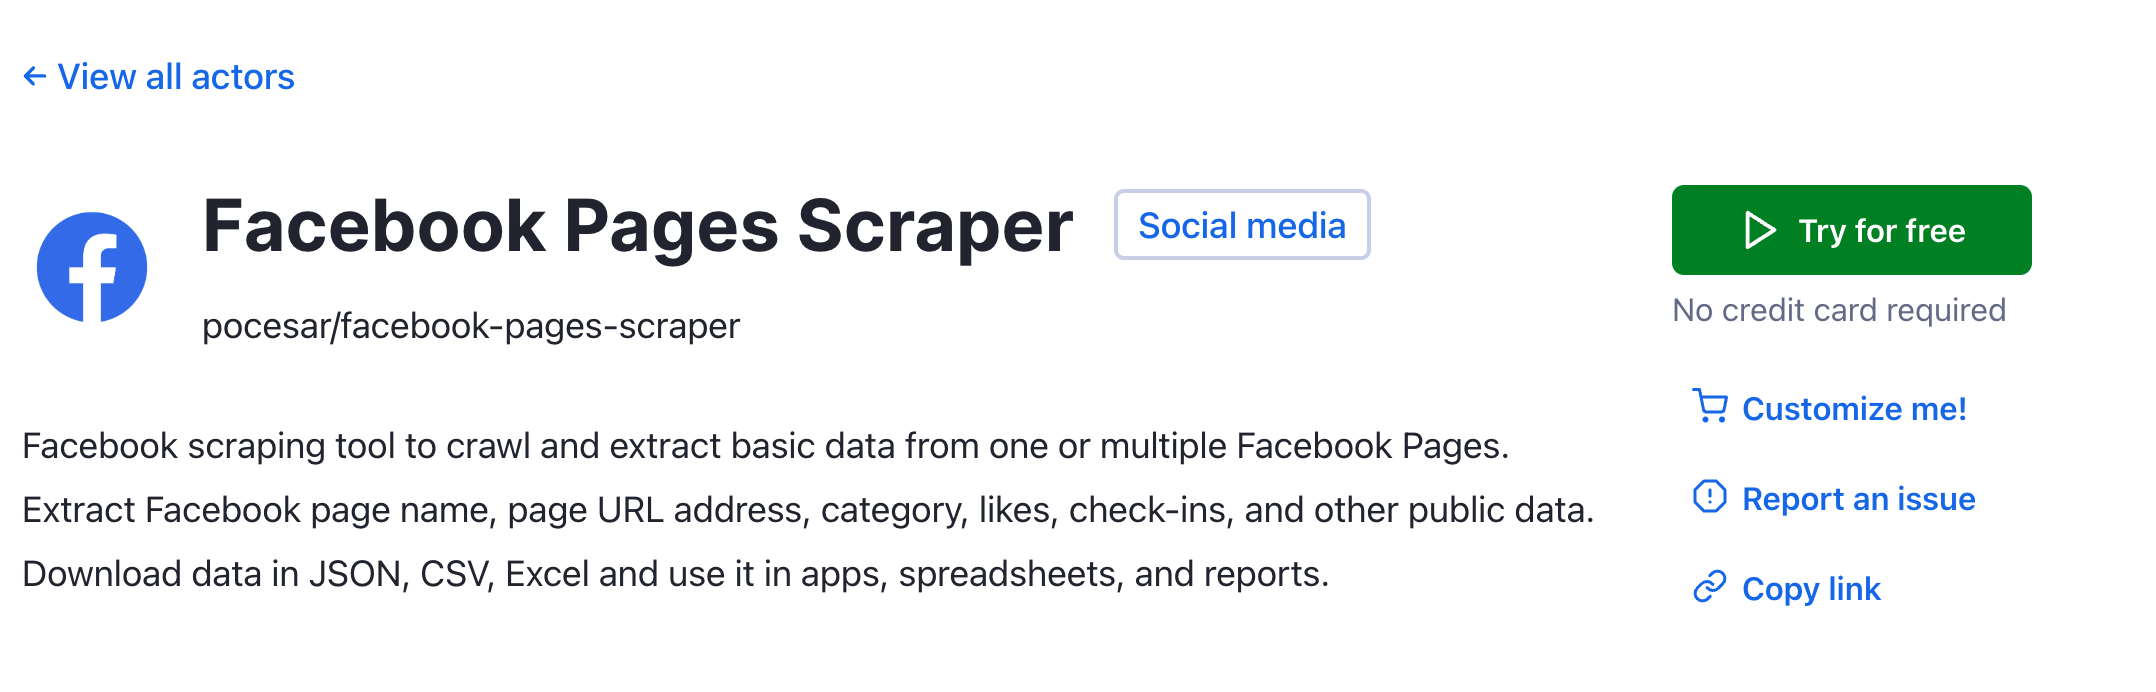 Step 1. Go to Facebook Pages Scraper